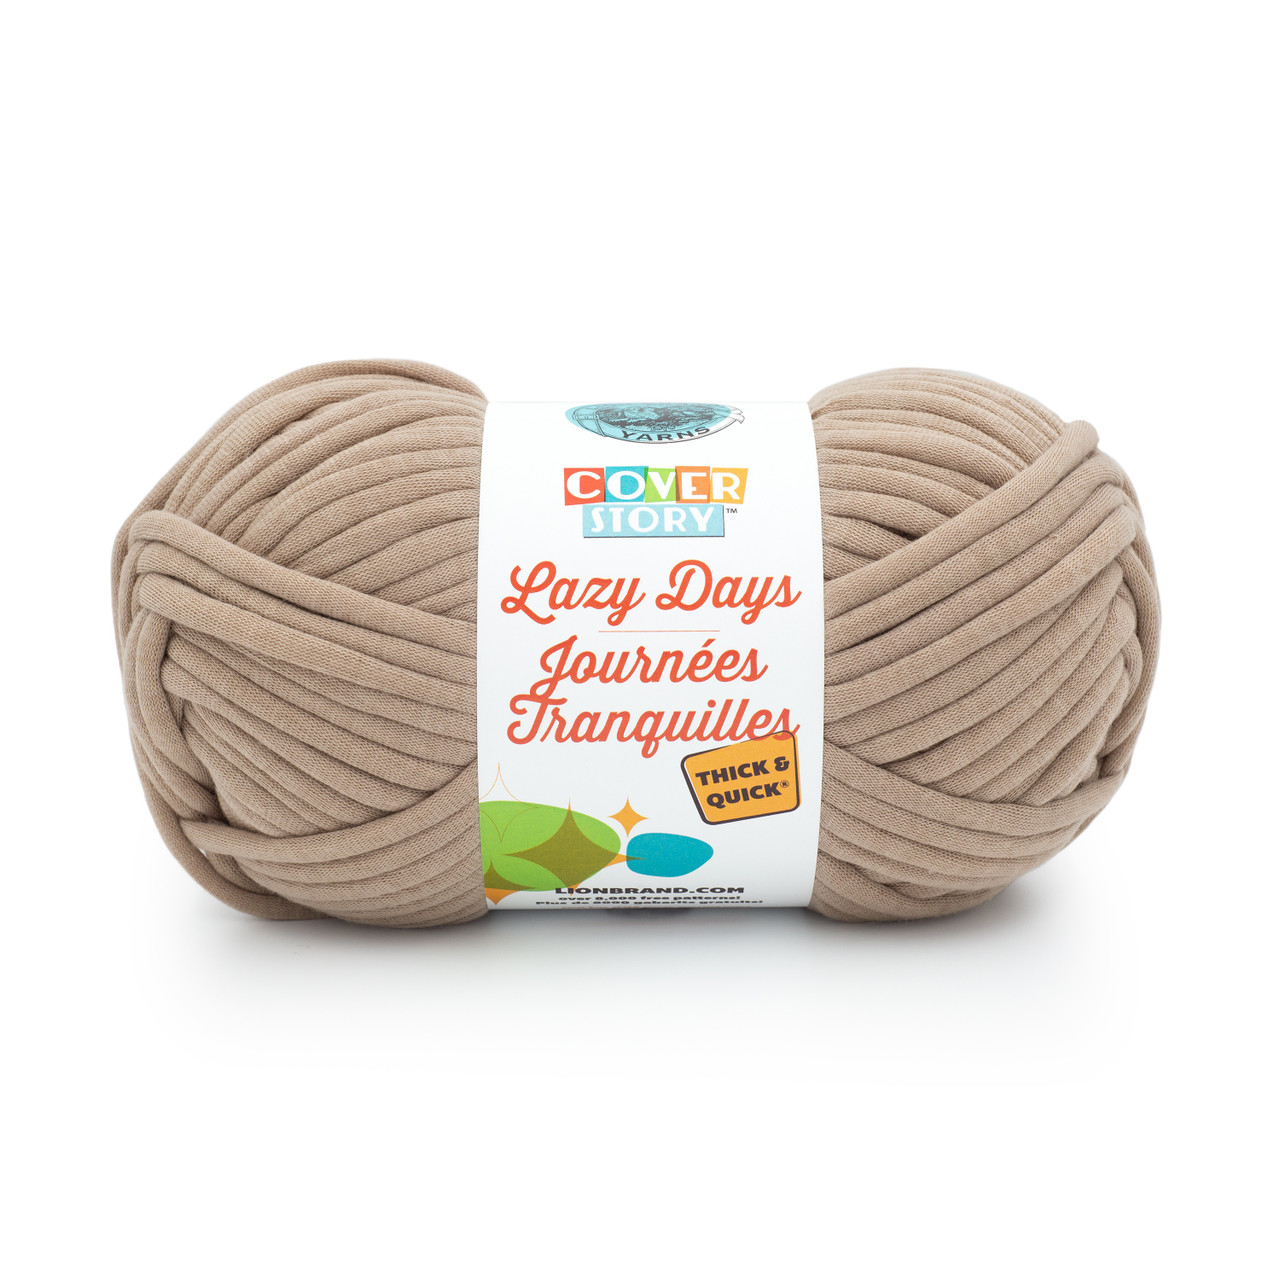 Lion Brand Cover Story Lazy Days Thick & Quick Yarn-Sandstone 191